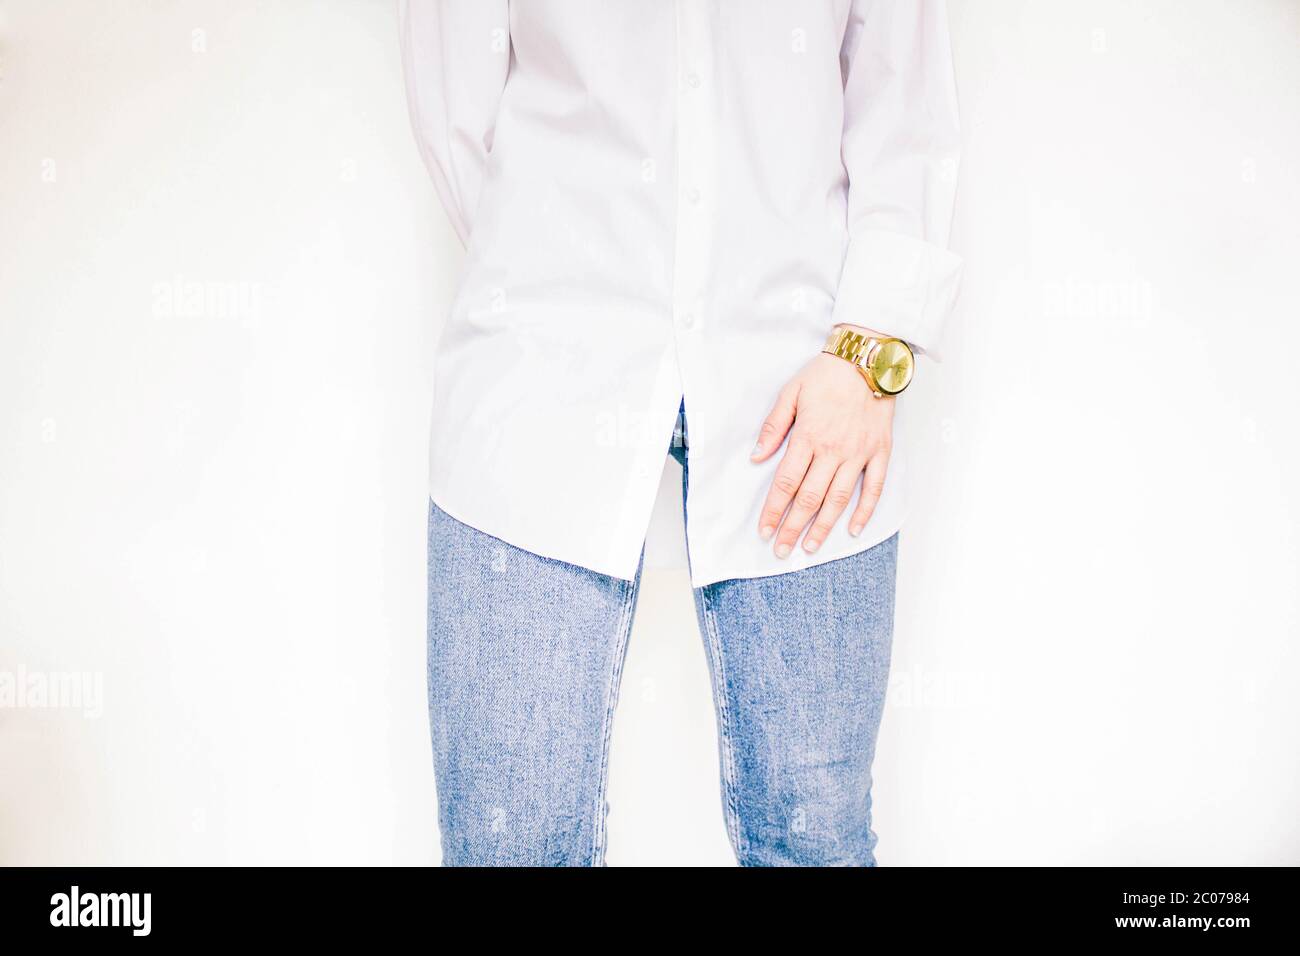 female body part, white shirt, jeans and watch on the wrist Stock Photo